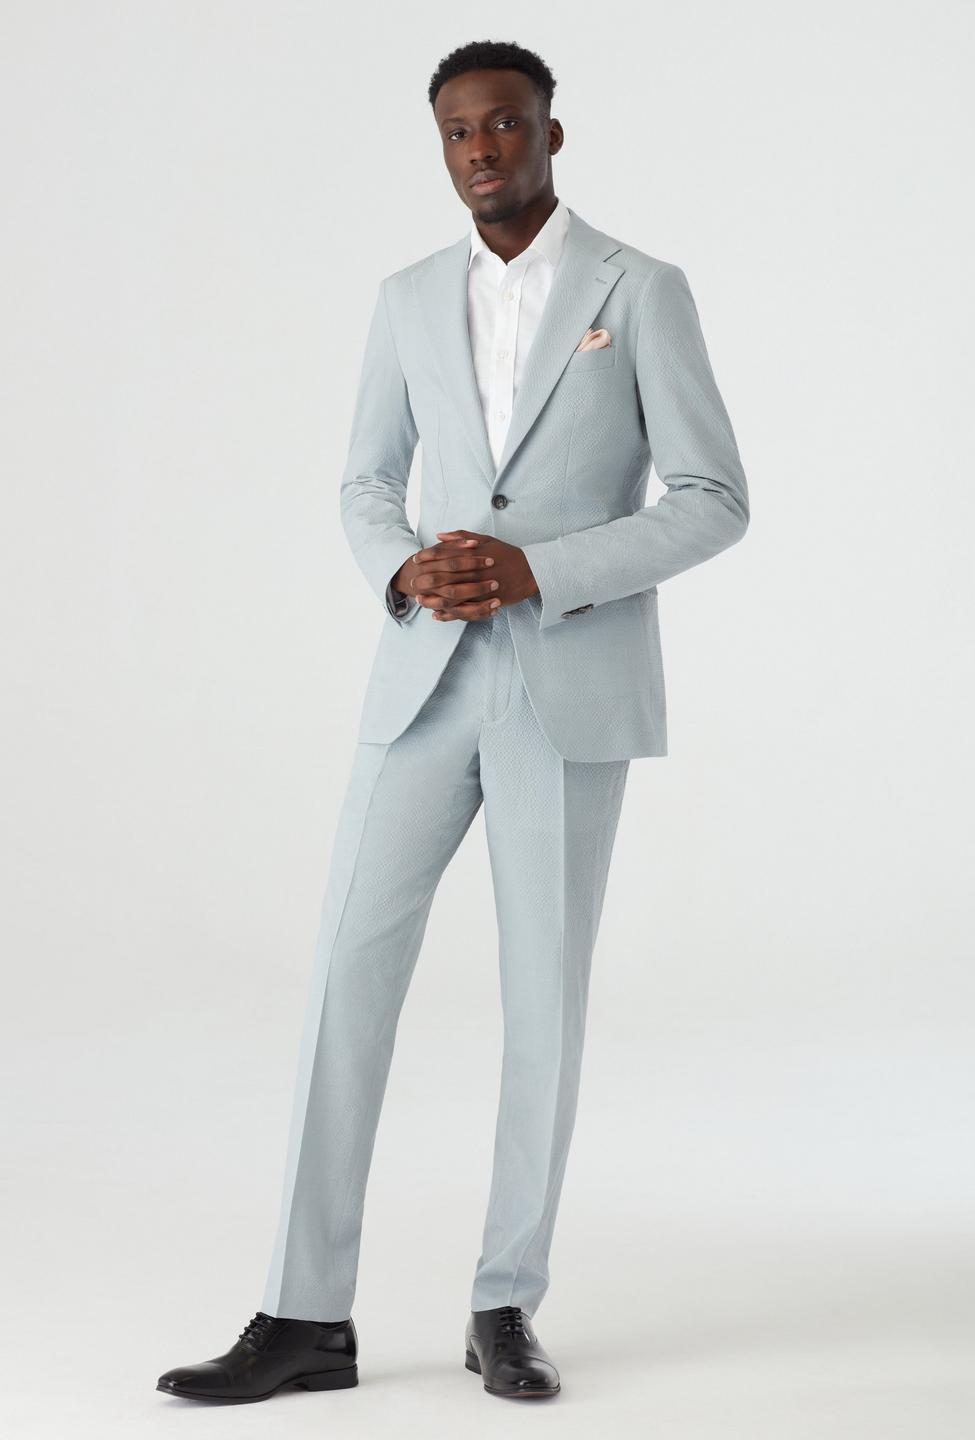 Gray blazer - Solid Design from Seasonal Indochino Collection